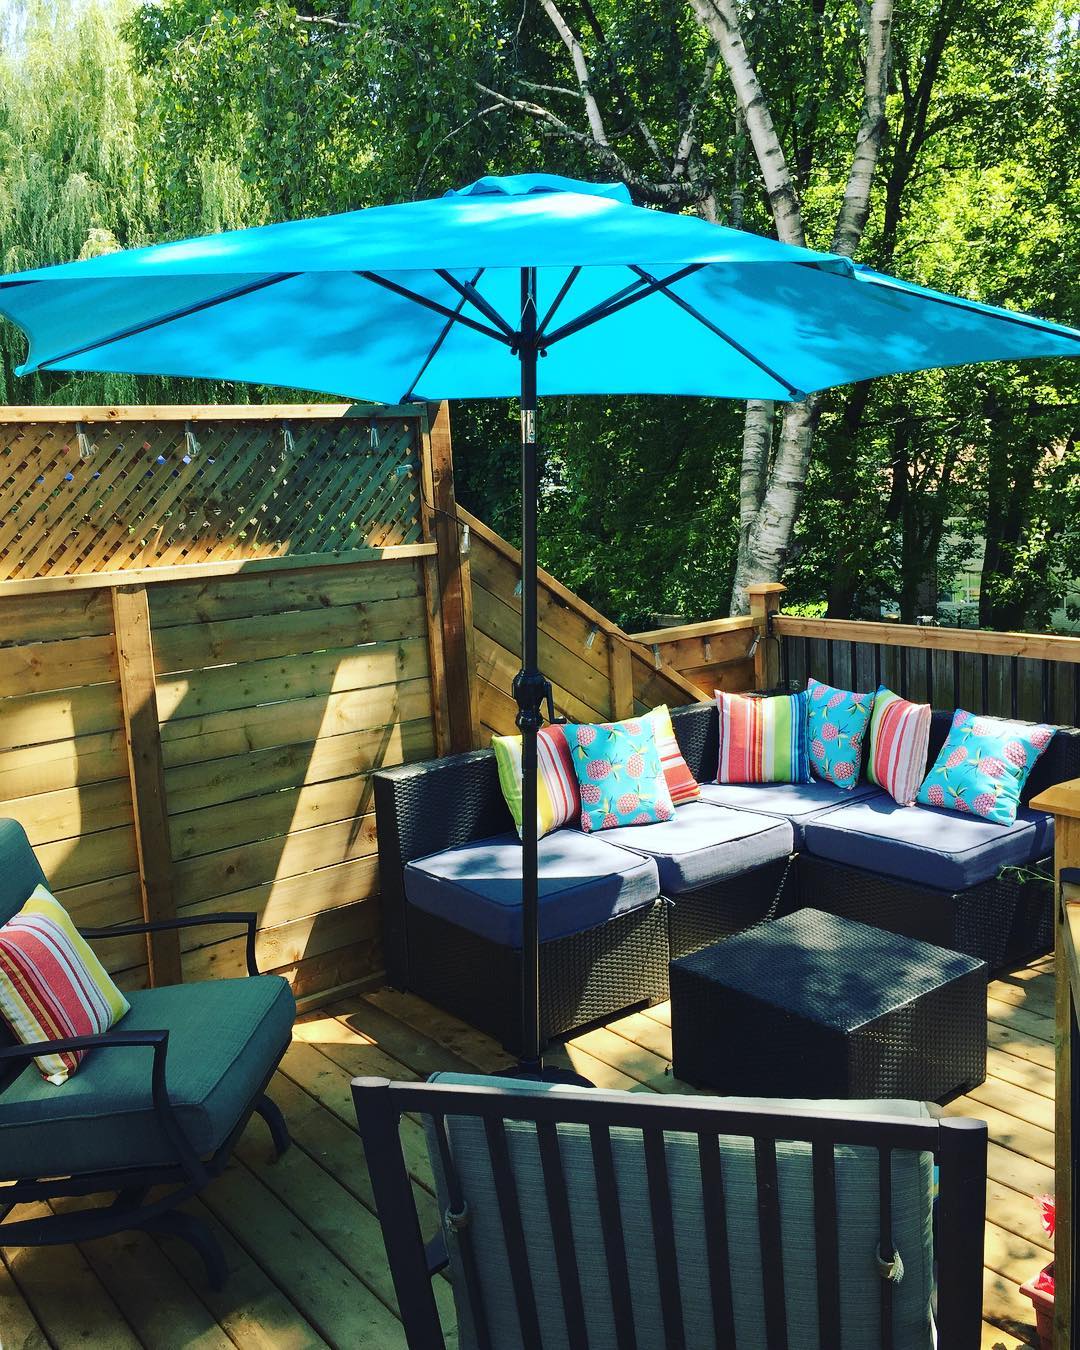 blue umbrella on a deck with seating around photo by Instagram user @gruth3